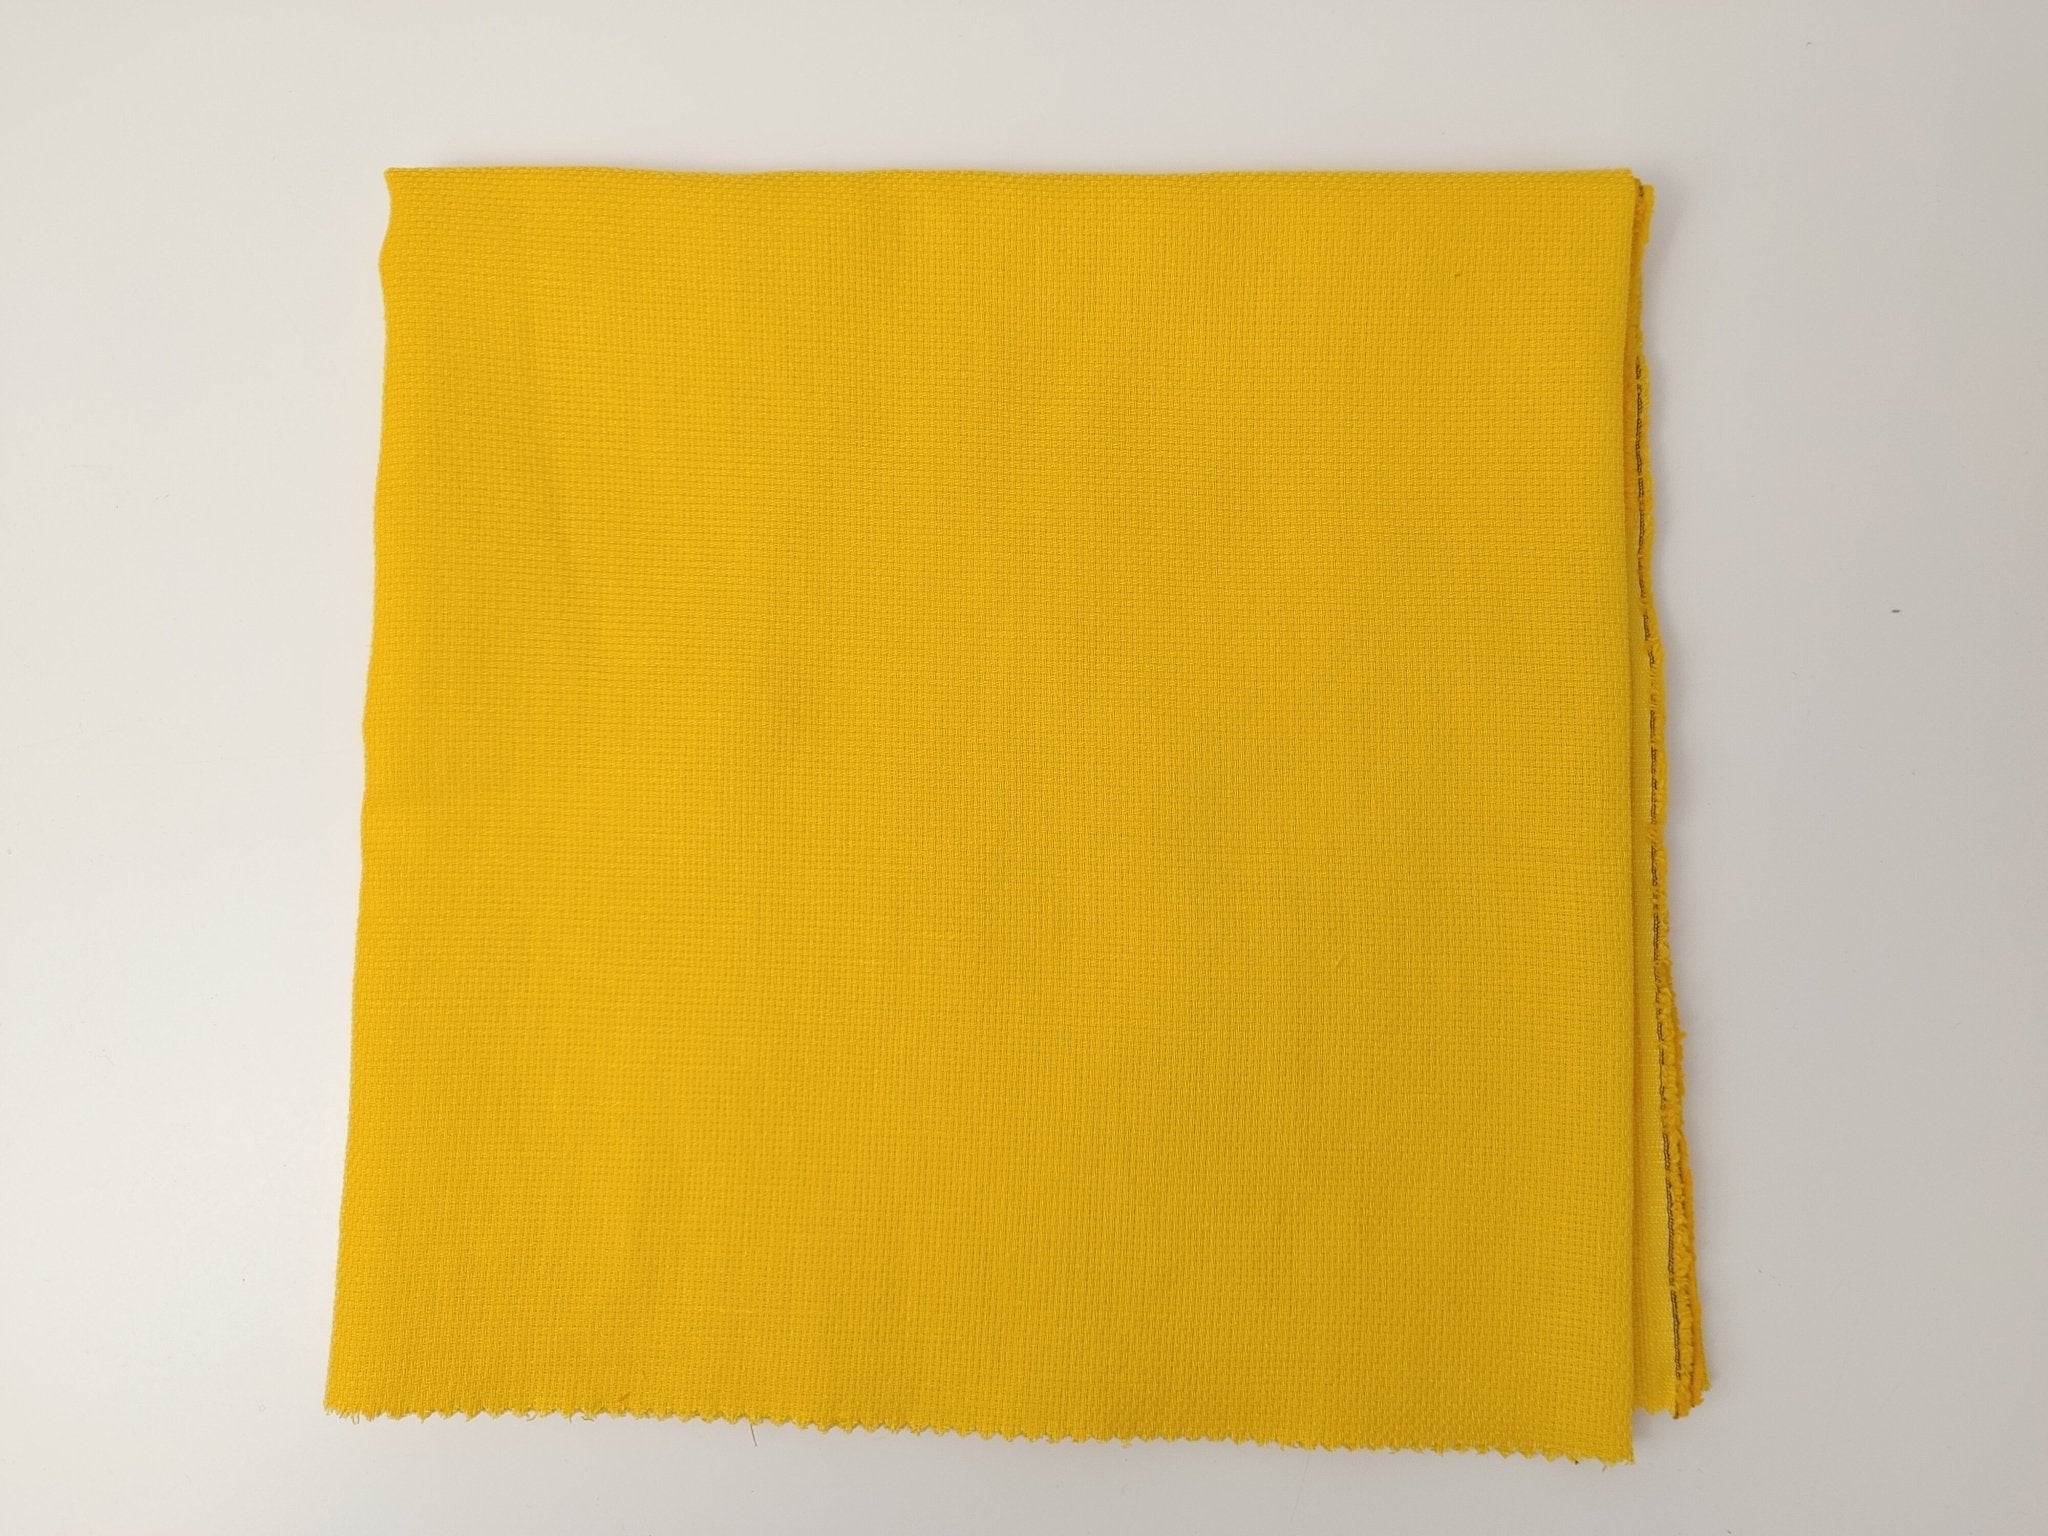 Linen Cotton Blend Dobby Fabric 3932 3933 3934 - The Linen Lab - Yellow